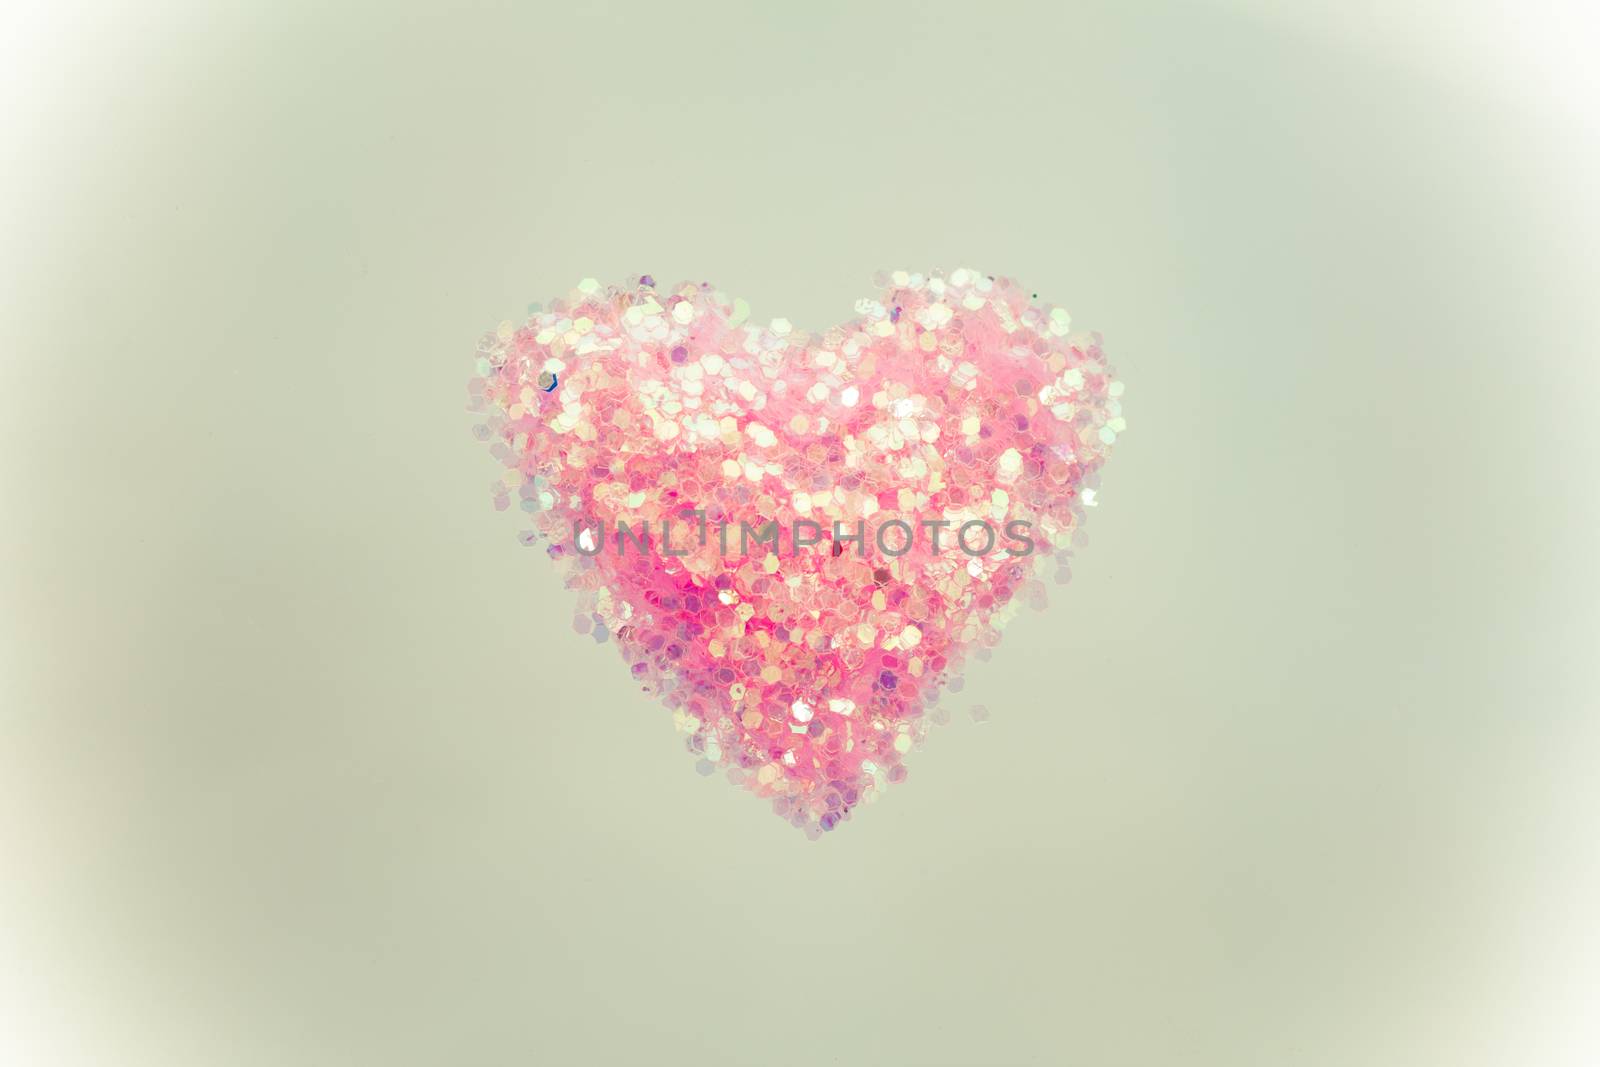 Heart shape on colour background,vintage style by hadkhanong